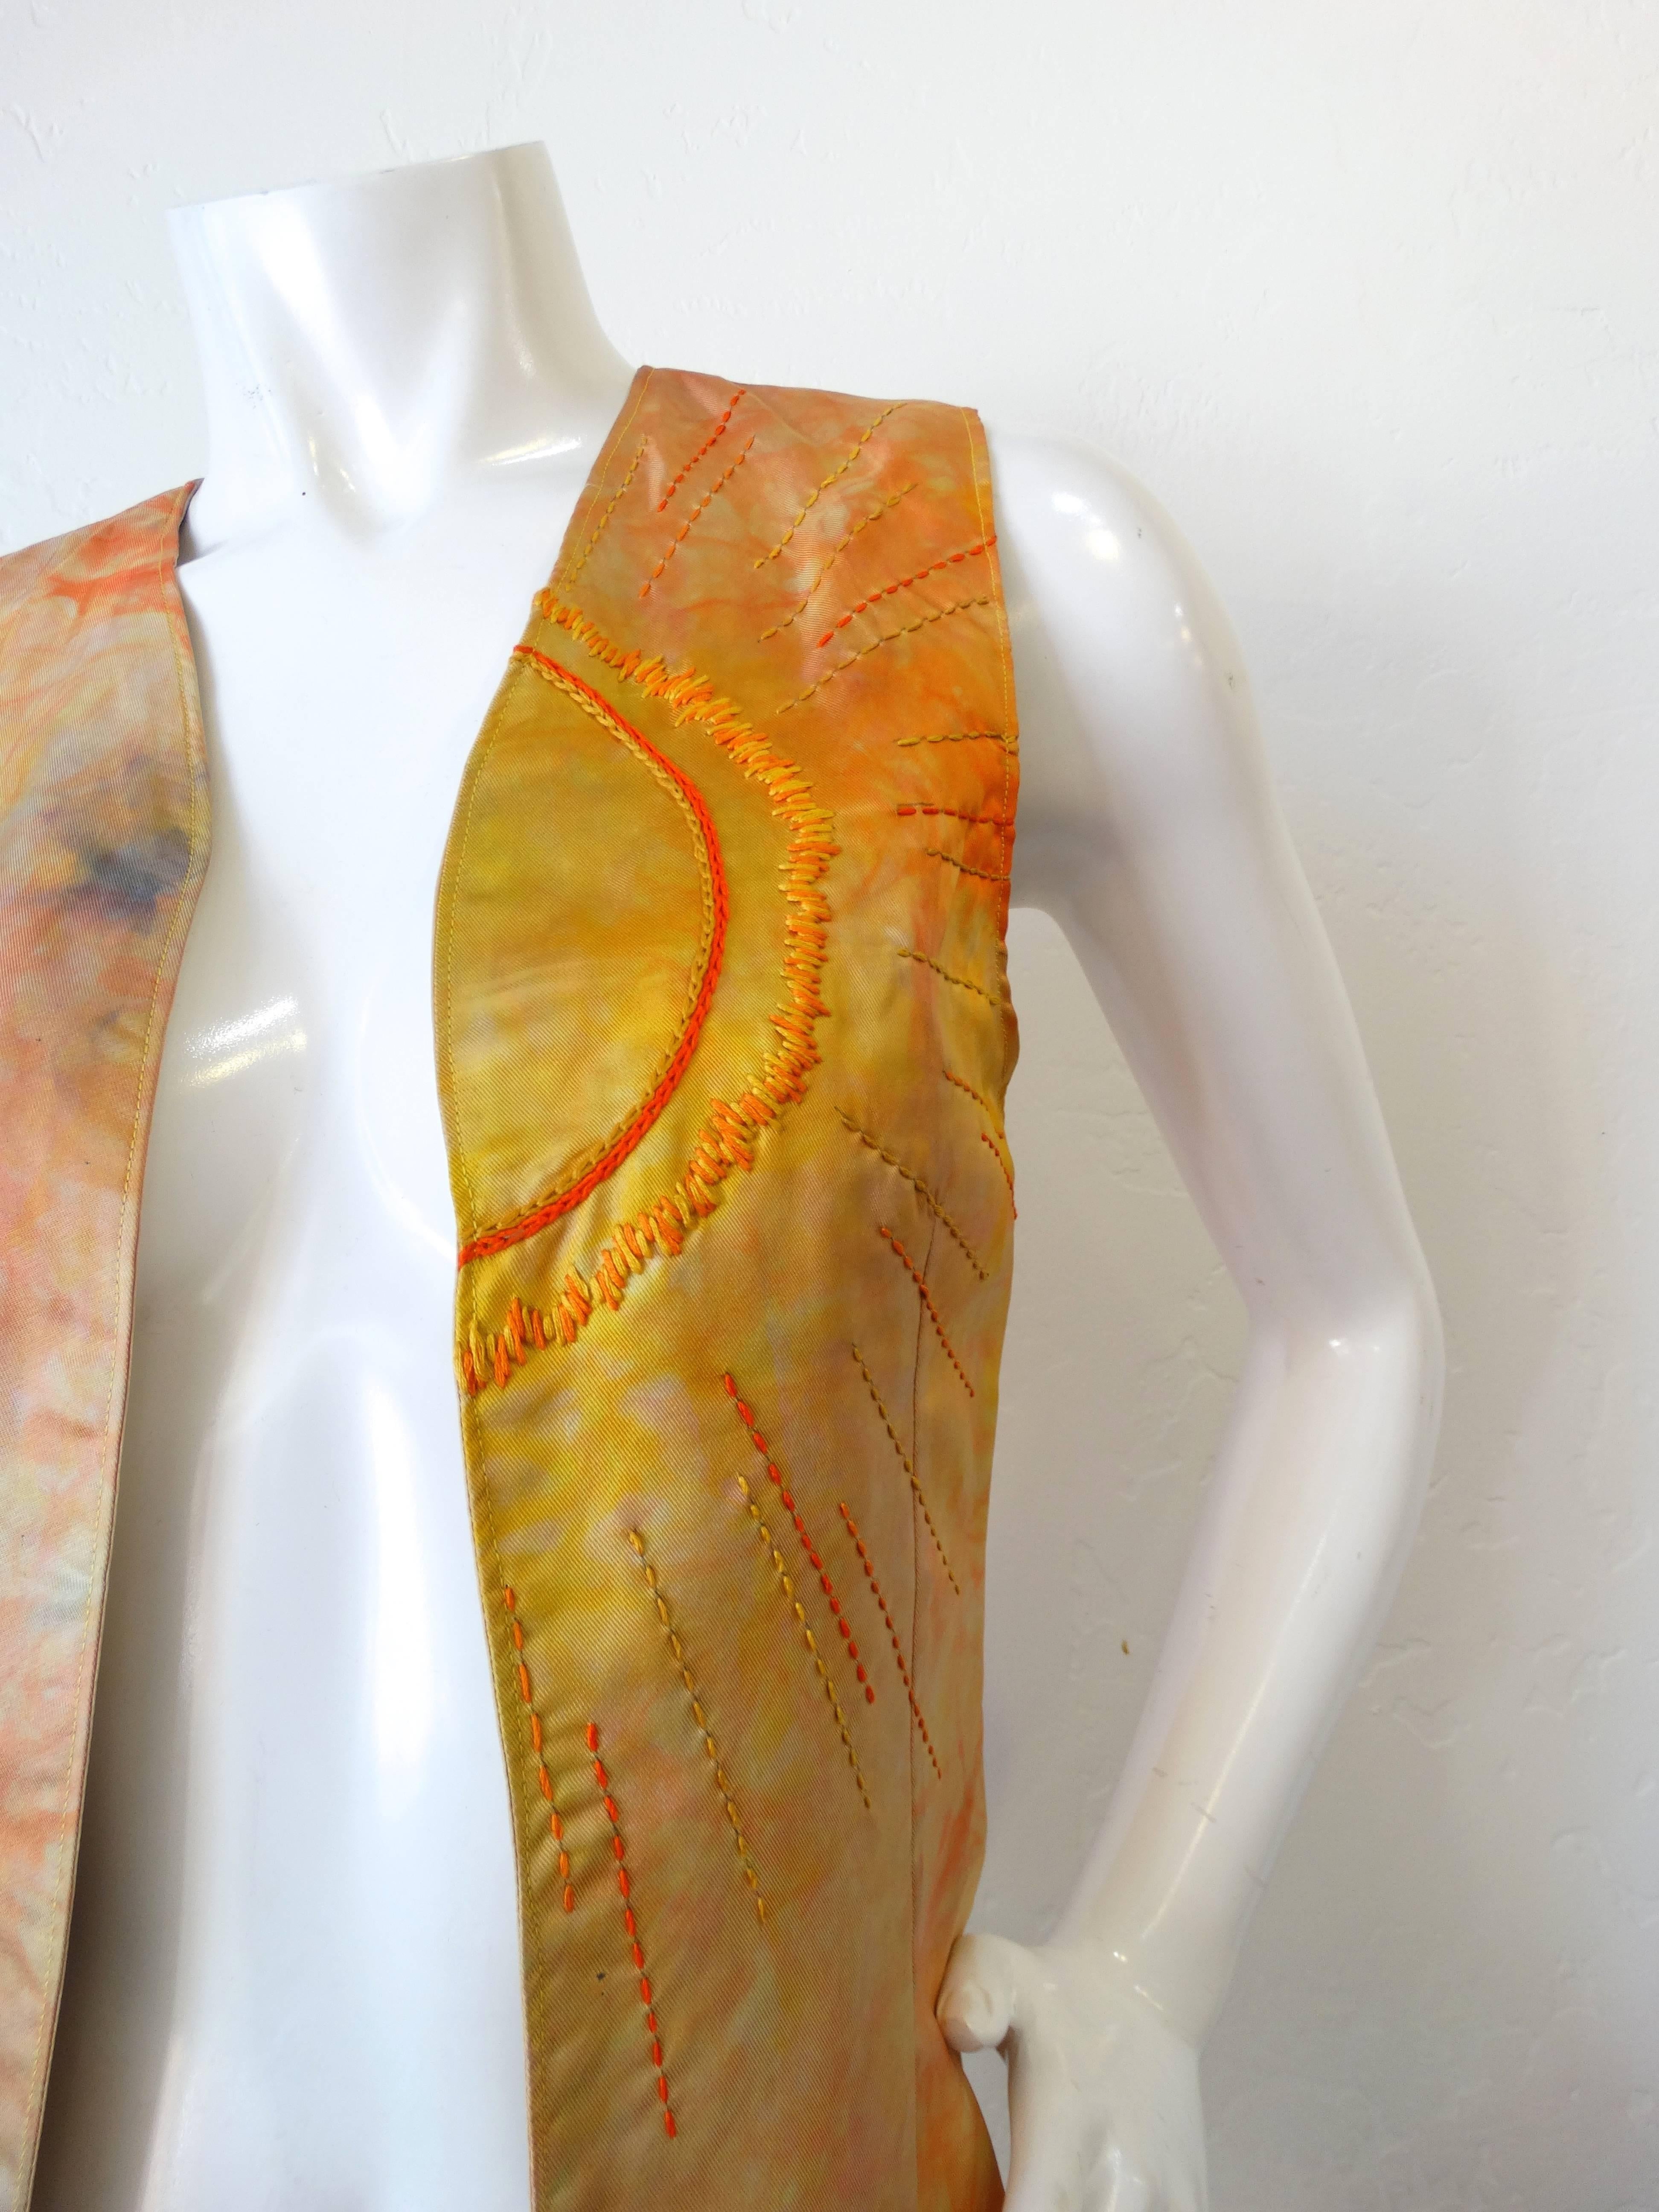 Channel the spirit of the 1970s this festival season with our amazing silk vest! Constructed of a soft silk fabric, tie-dyed in hues of orange, yellow and blue. Classic vest silhouette with open fit. Embroidered with a Sun motif on the left side in